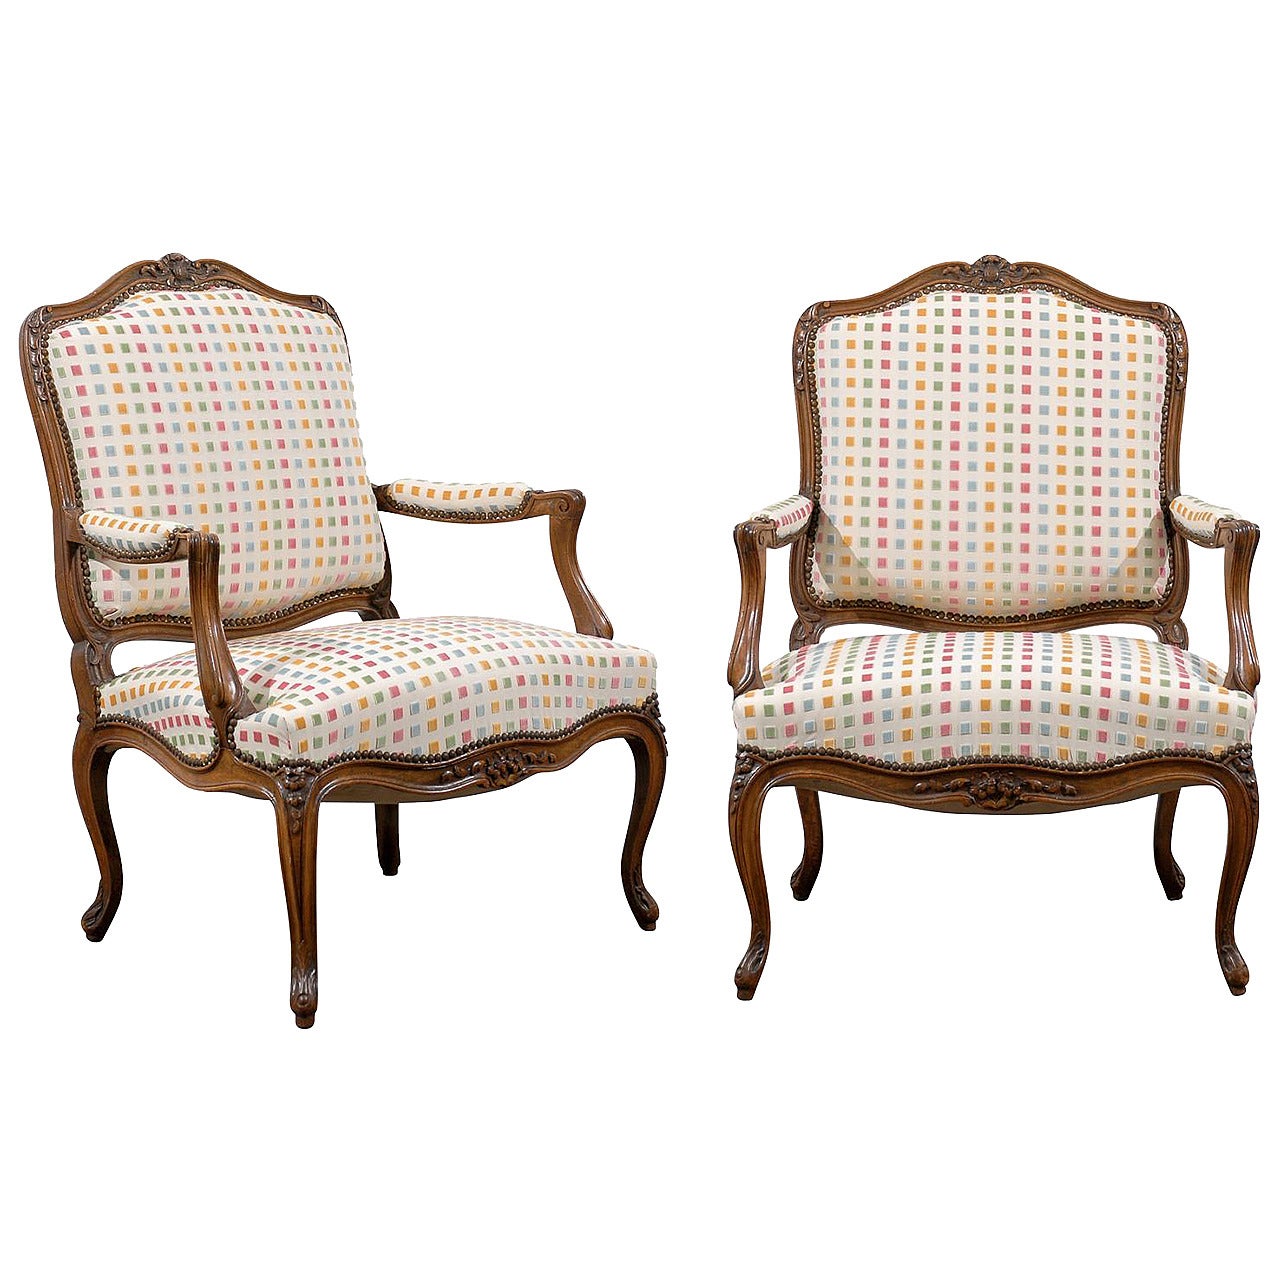 Pair of 19th Century Louis Fauteuil Chairs in Walnut